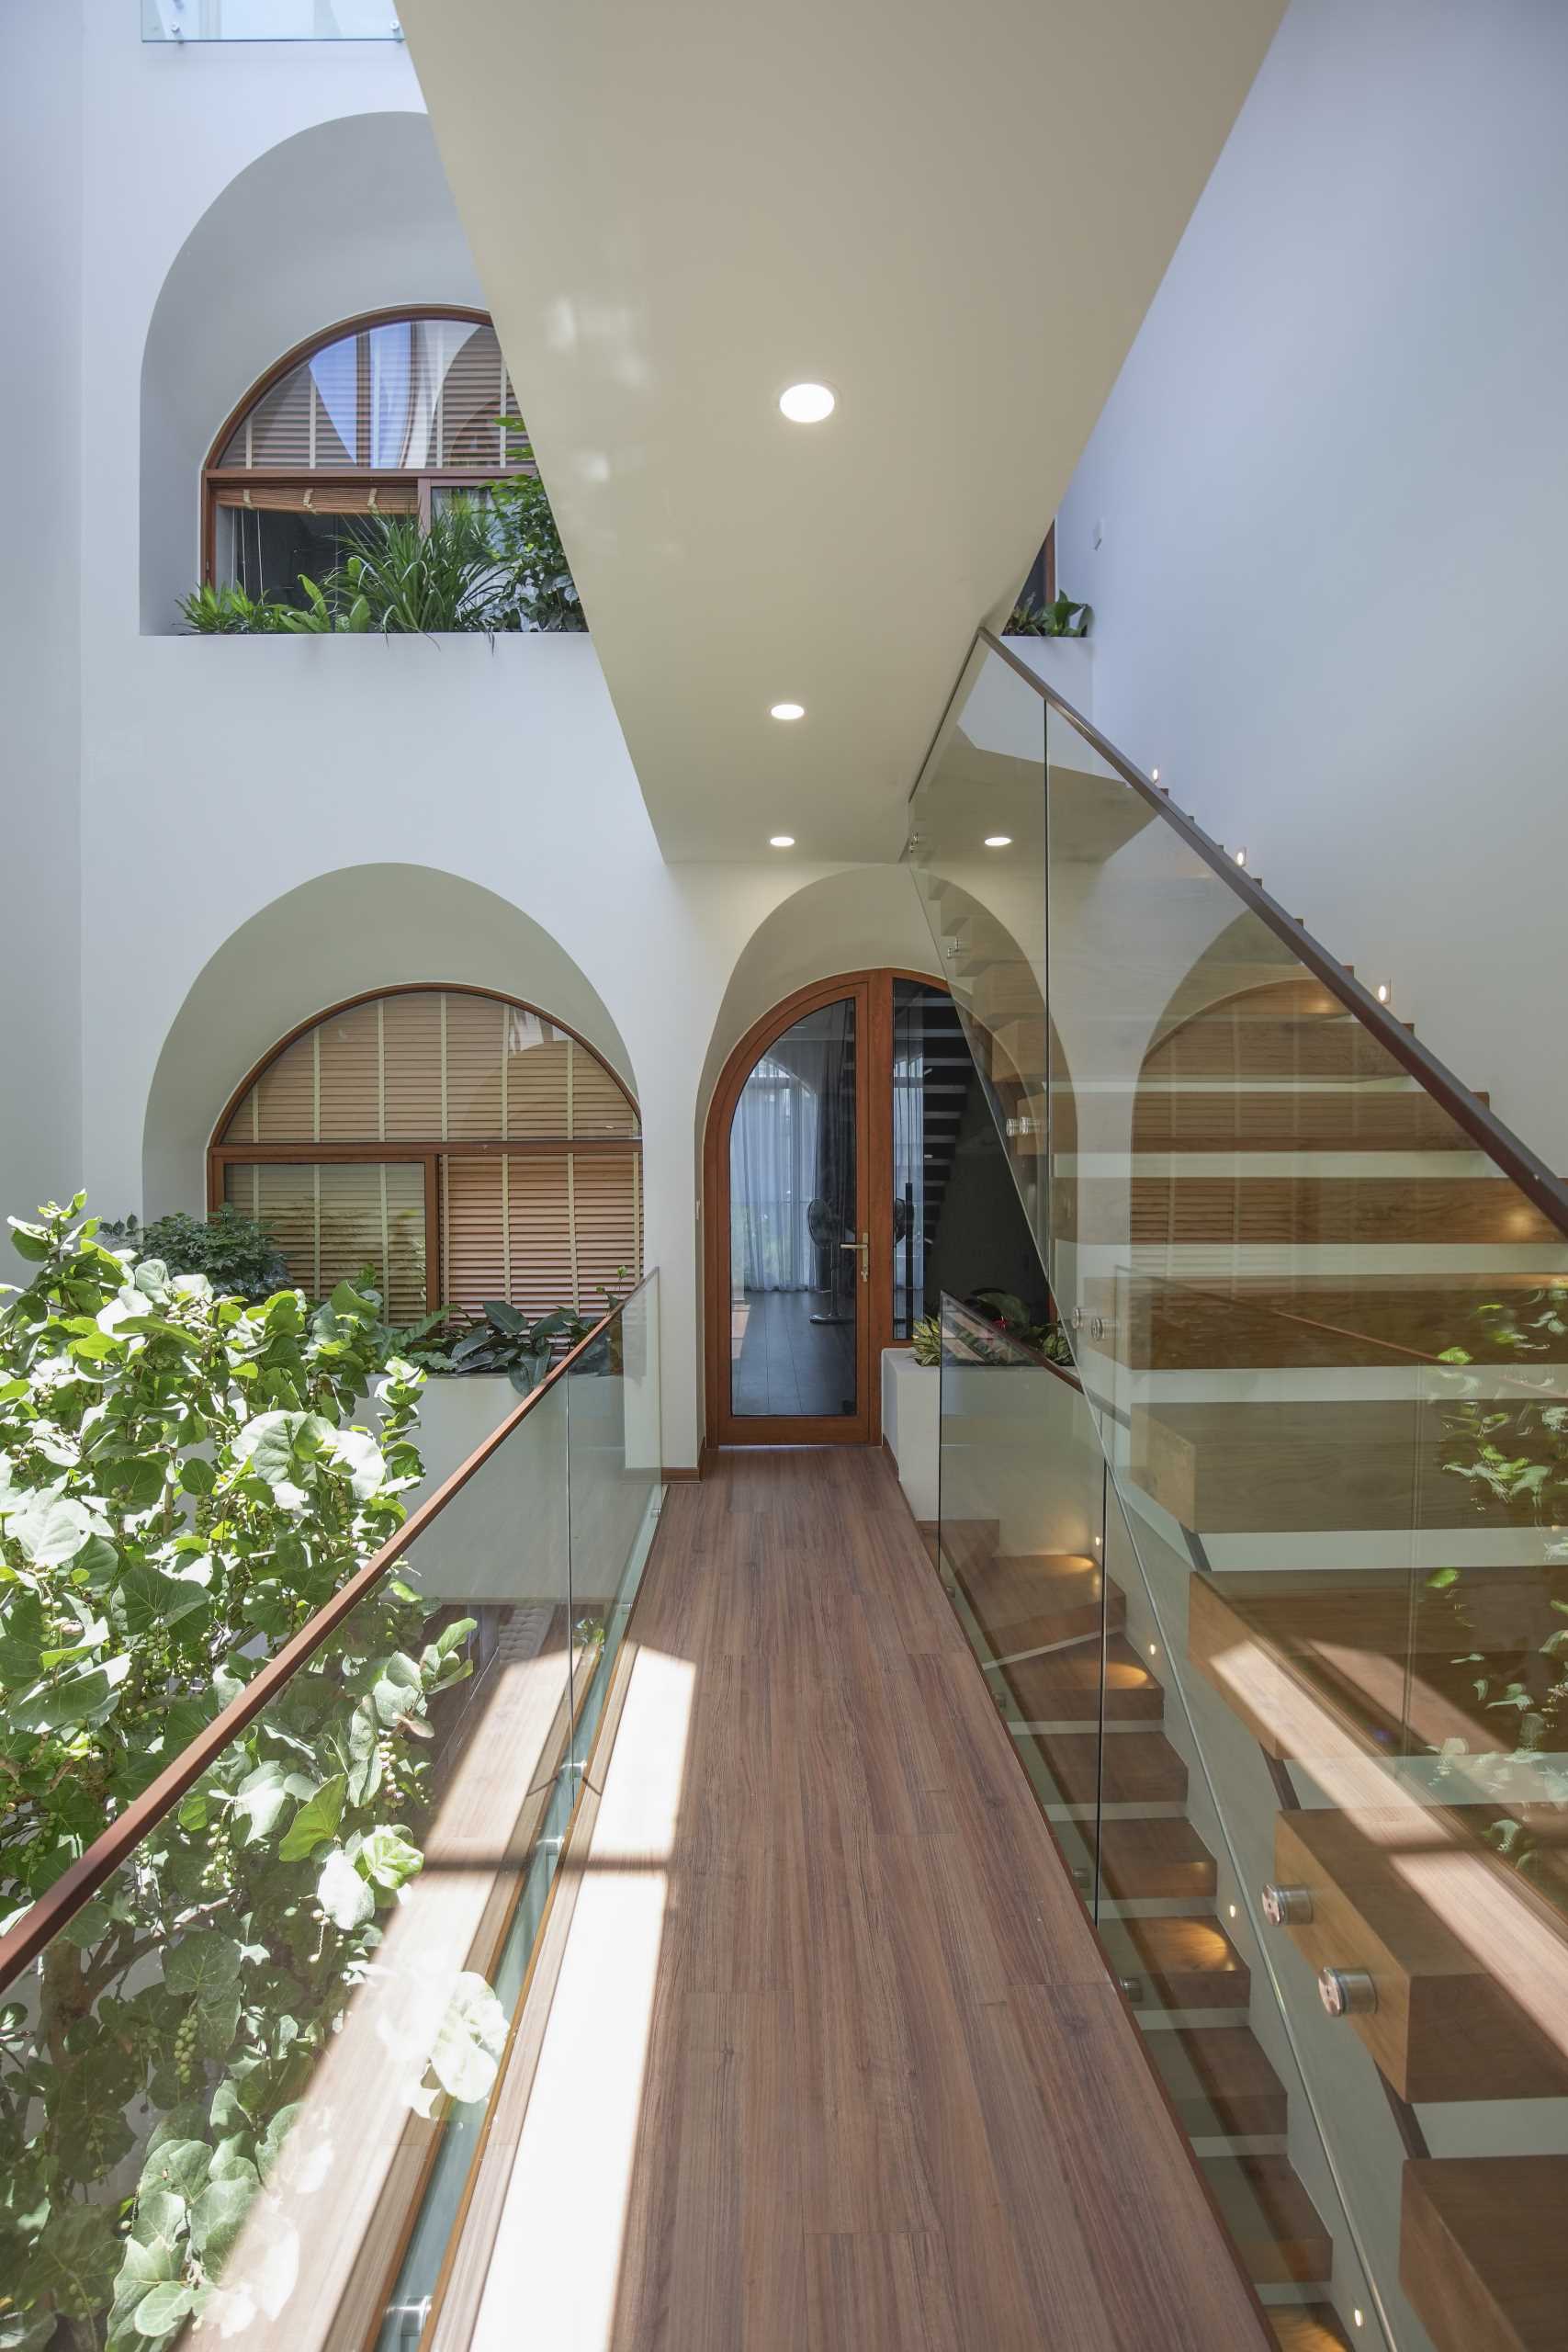 A modern home with an atrium, wood stairs, arched openings, and interior bridges.